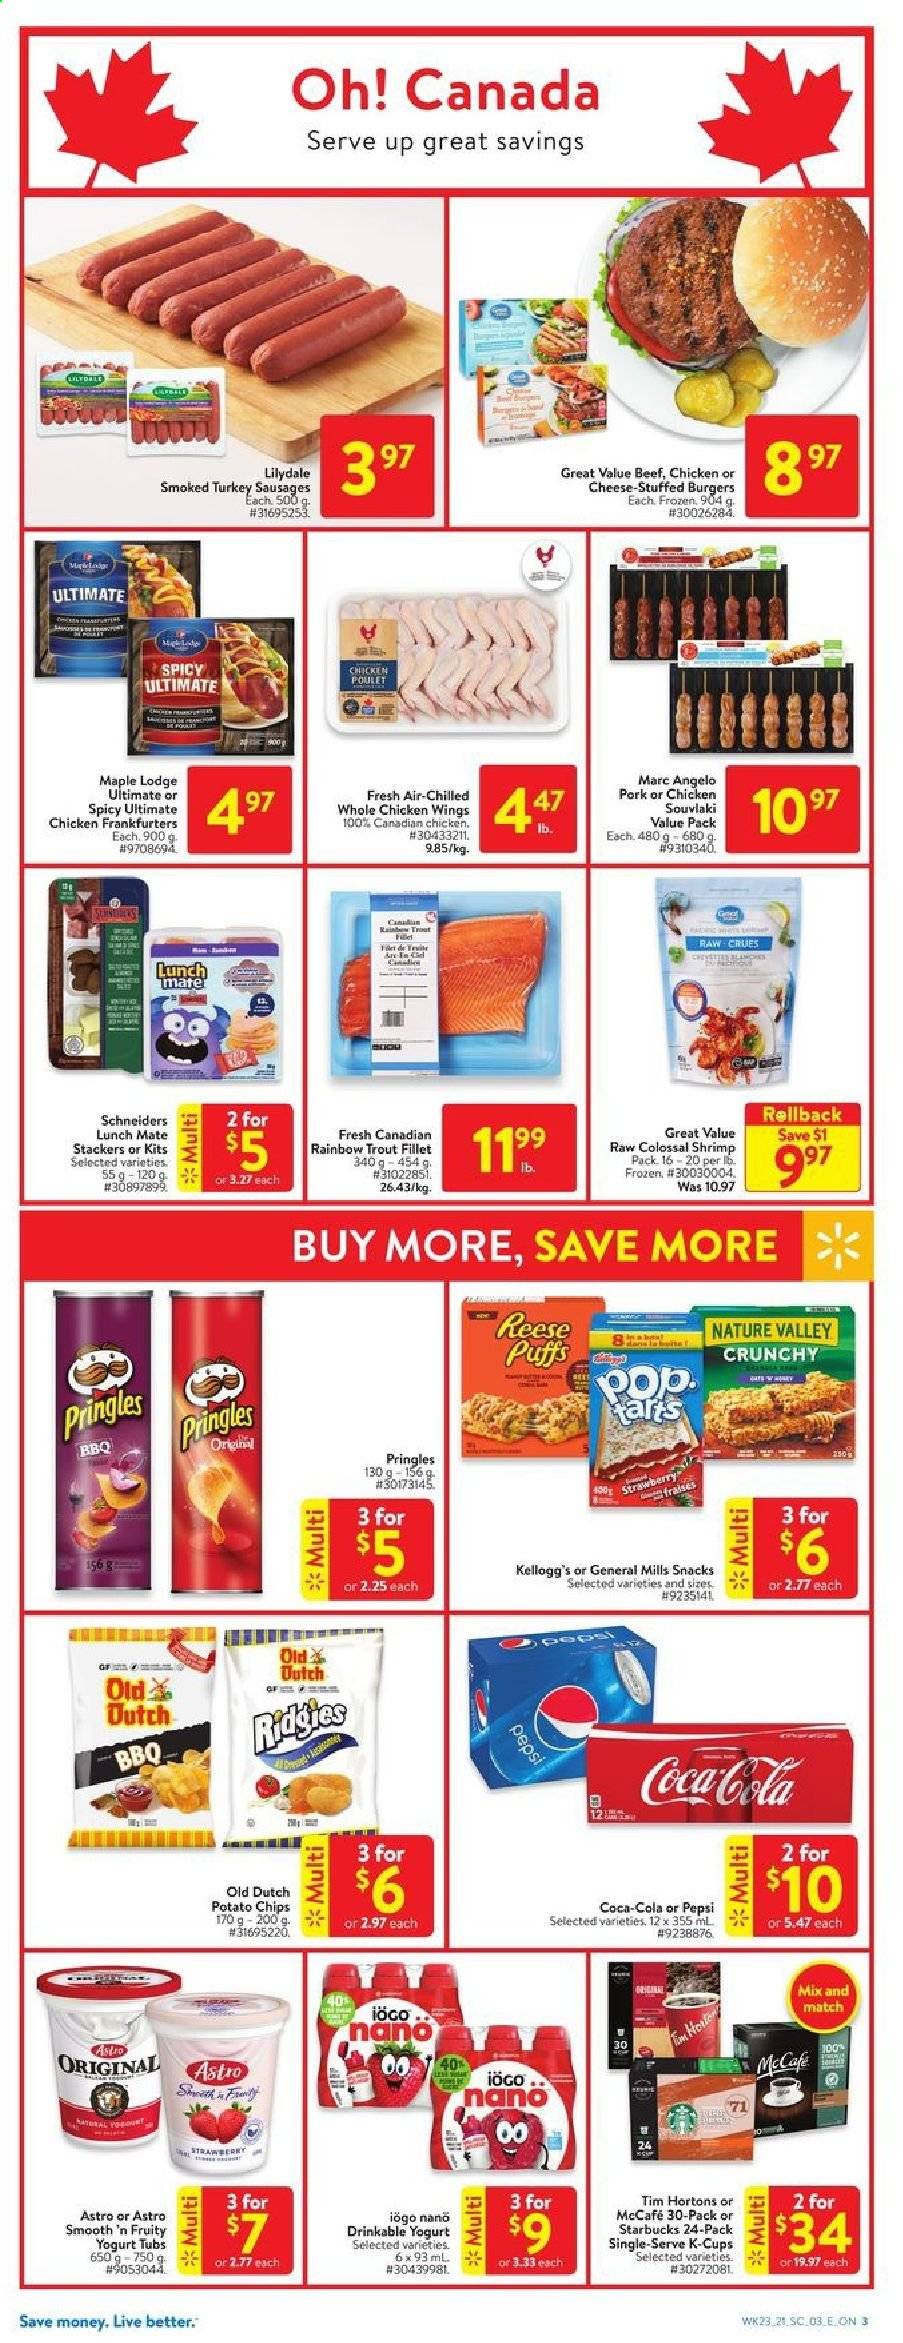 thumbnail - Walmart Flyer - July 01, 2021 - July 07, 2021 - Sales products - trout, shrimps, hamburger, sausage, yoghurt, chicken wings, snack, Kellogg's, potato chips, Pringles, Nature Valley, Coca-Cola, Pepsi, coffee capsules, Starbucks, McCafe, K-Cups, whole chicken, chicken. Page 3.